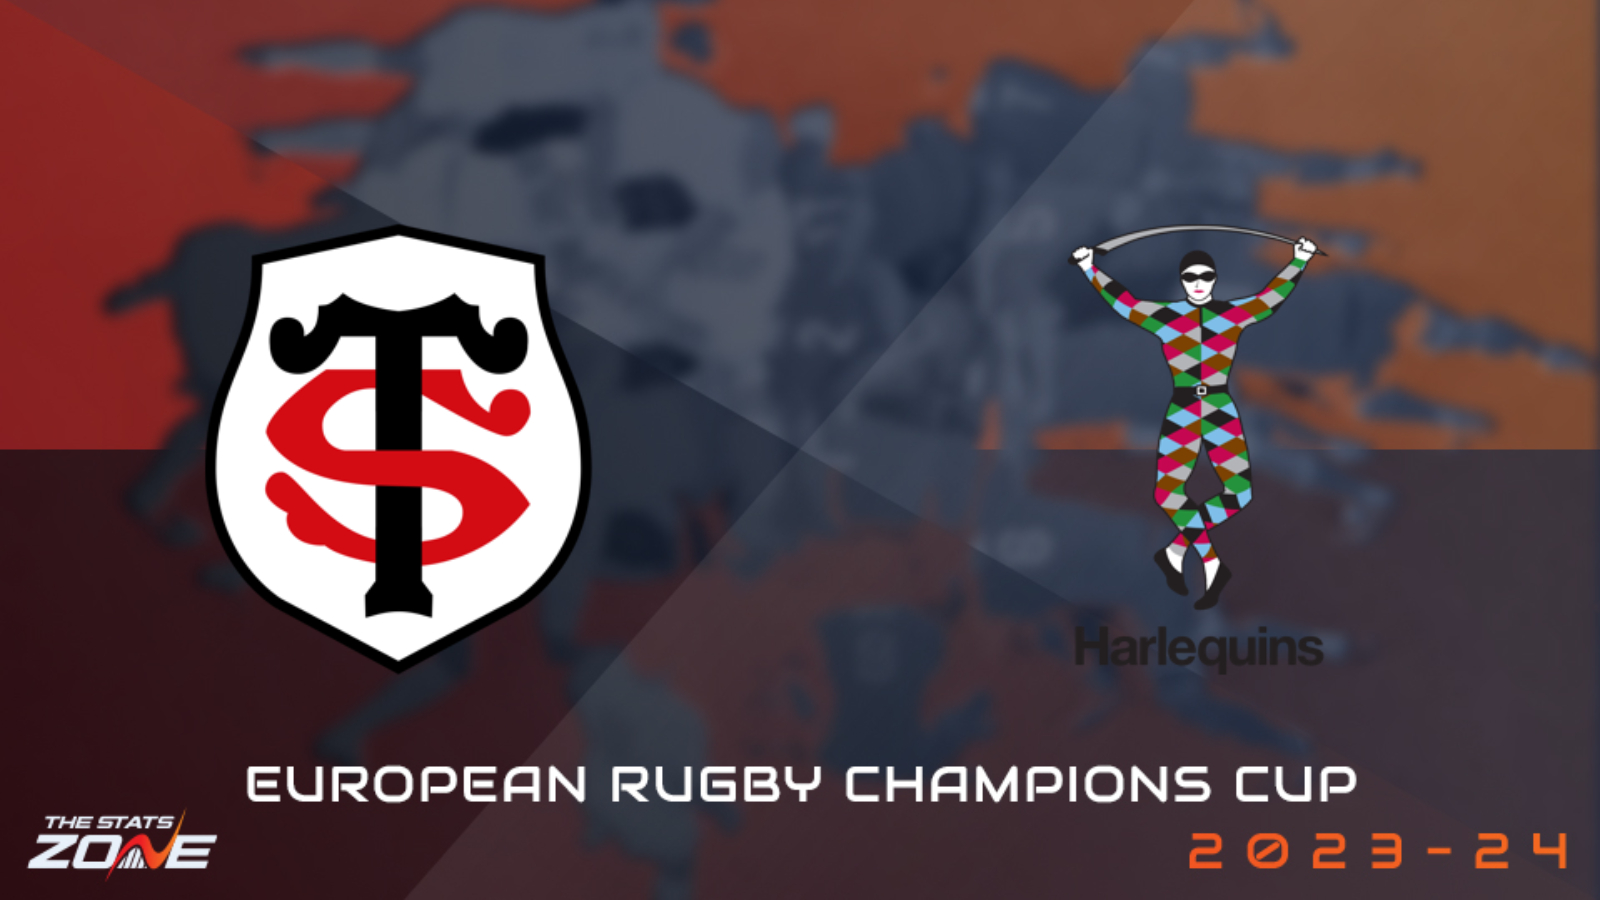 Toulouse vs Harlequins Preview & Prediction 202324 European Rugby